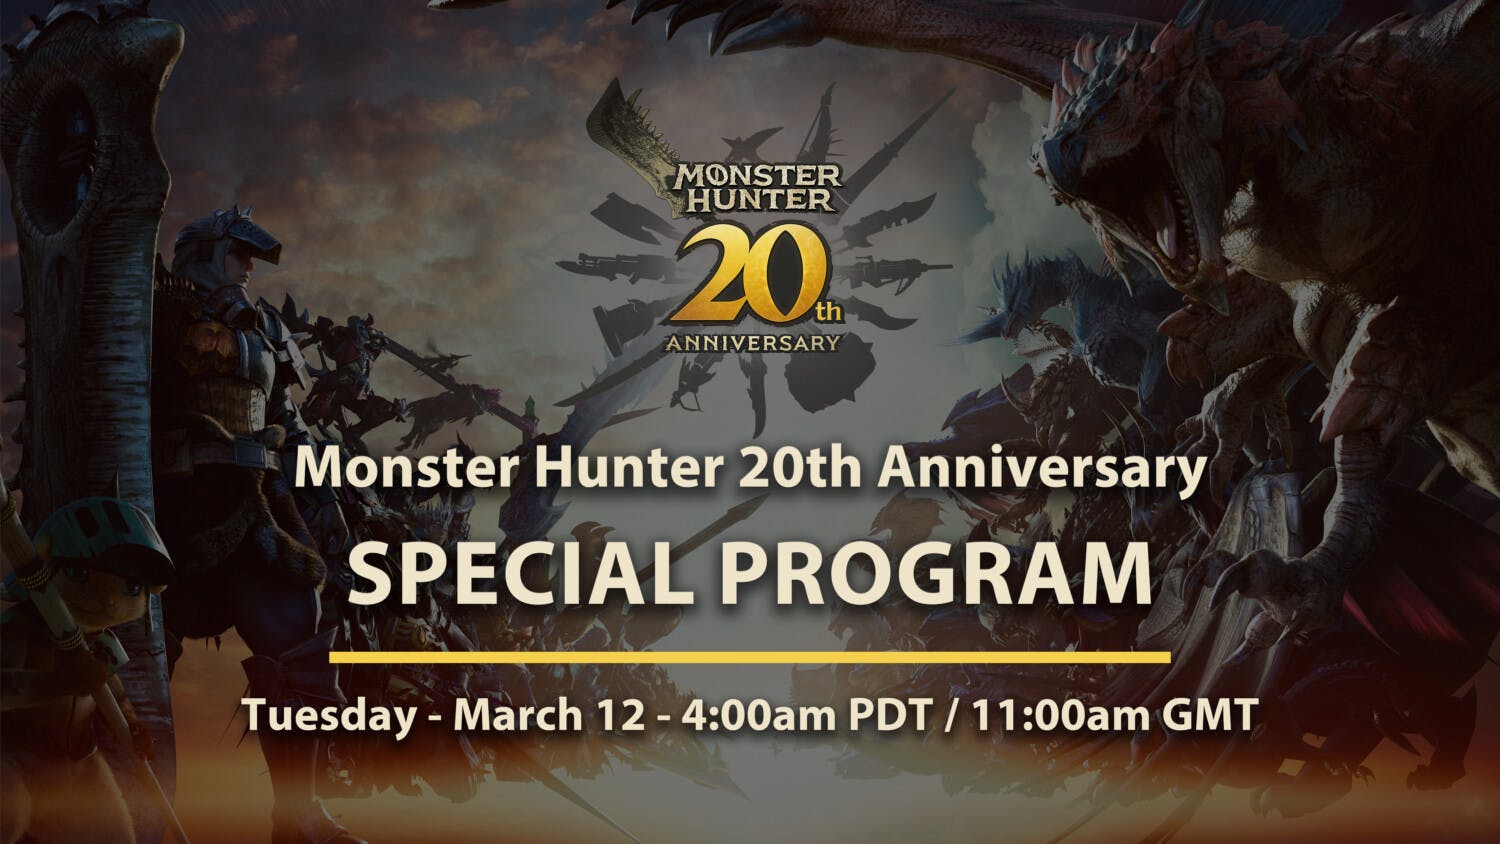 Cover Image for Monster Hunter 20th Anniversary Special Program Announced For March 12th 2024